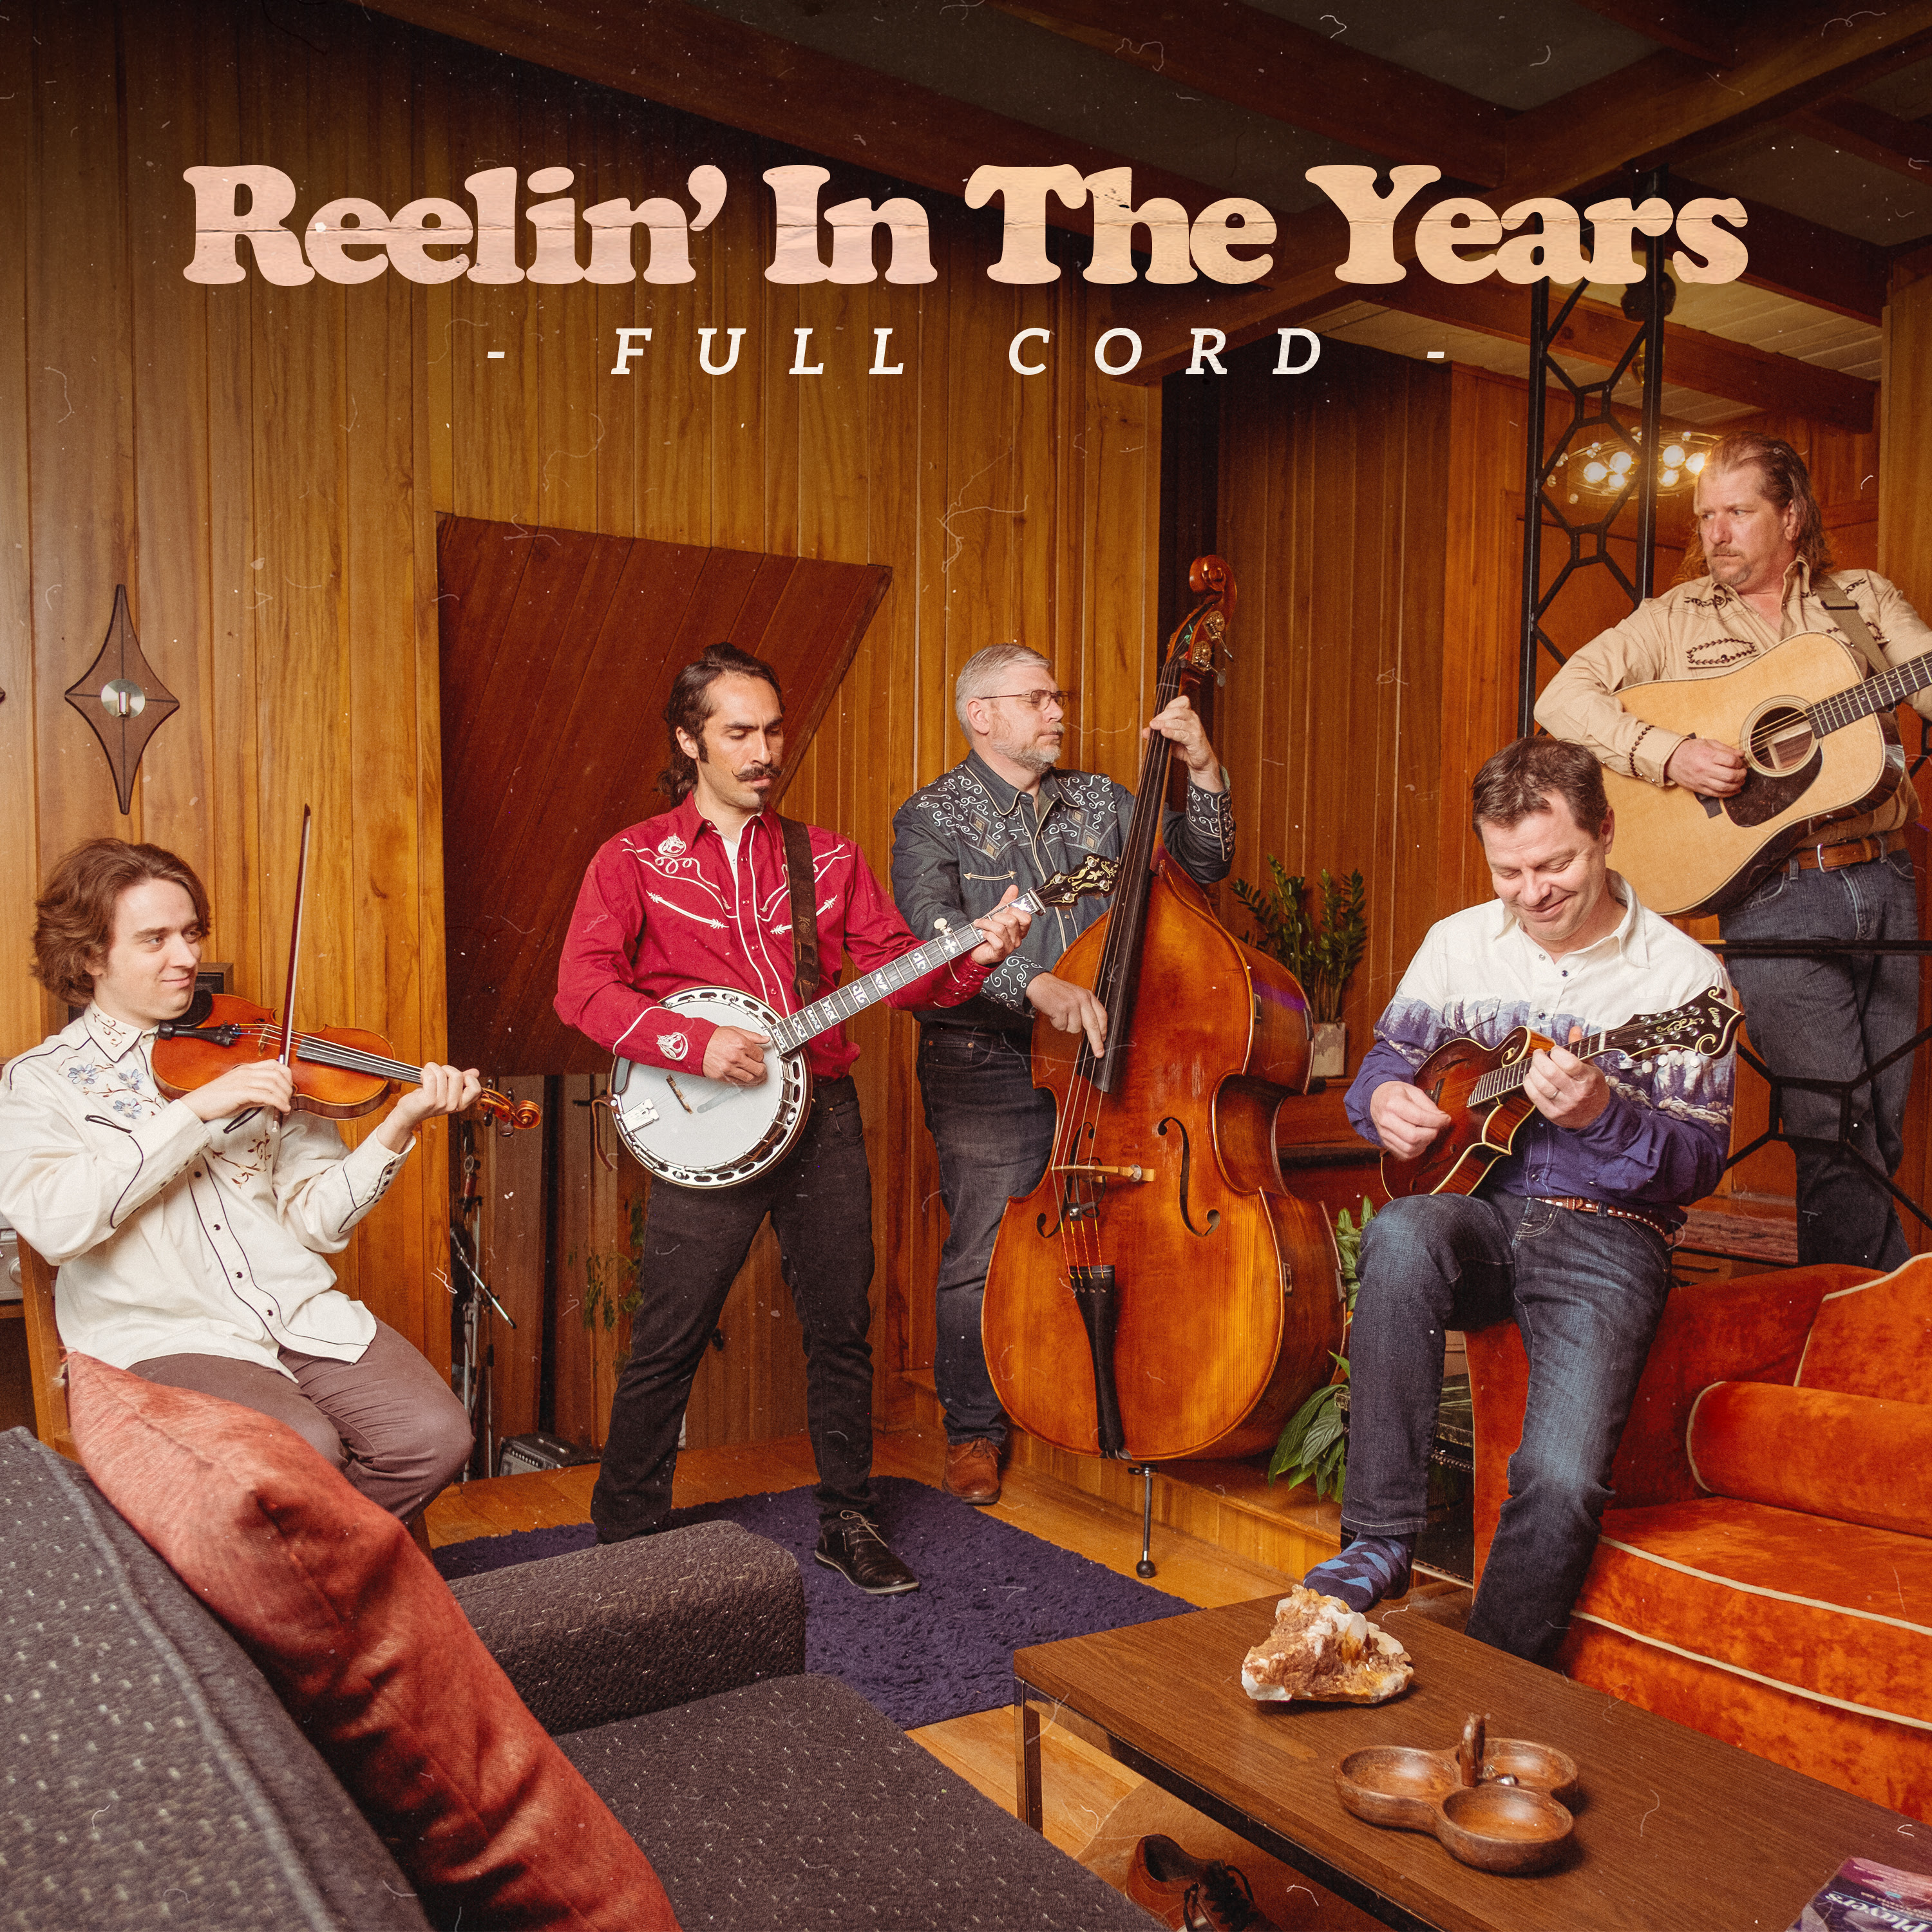 Michigan-Based Full Cord Offers a Unique Blend of Bluegrass and Funk in Their Latest Single “Reelin' In The Years”